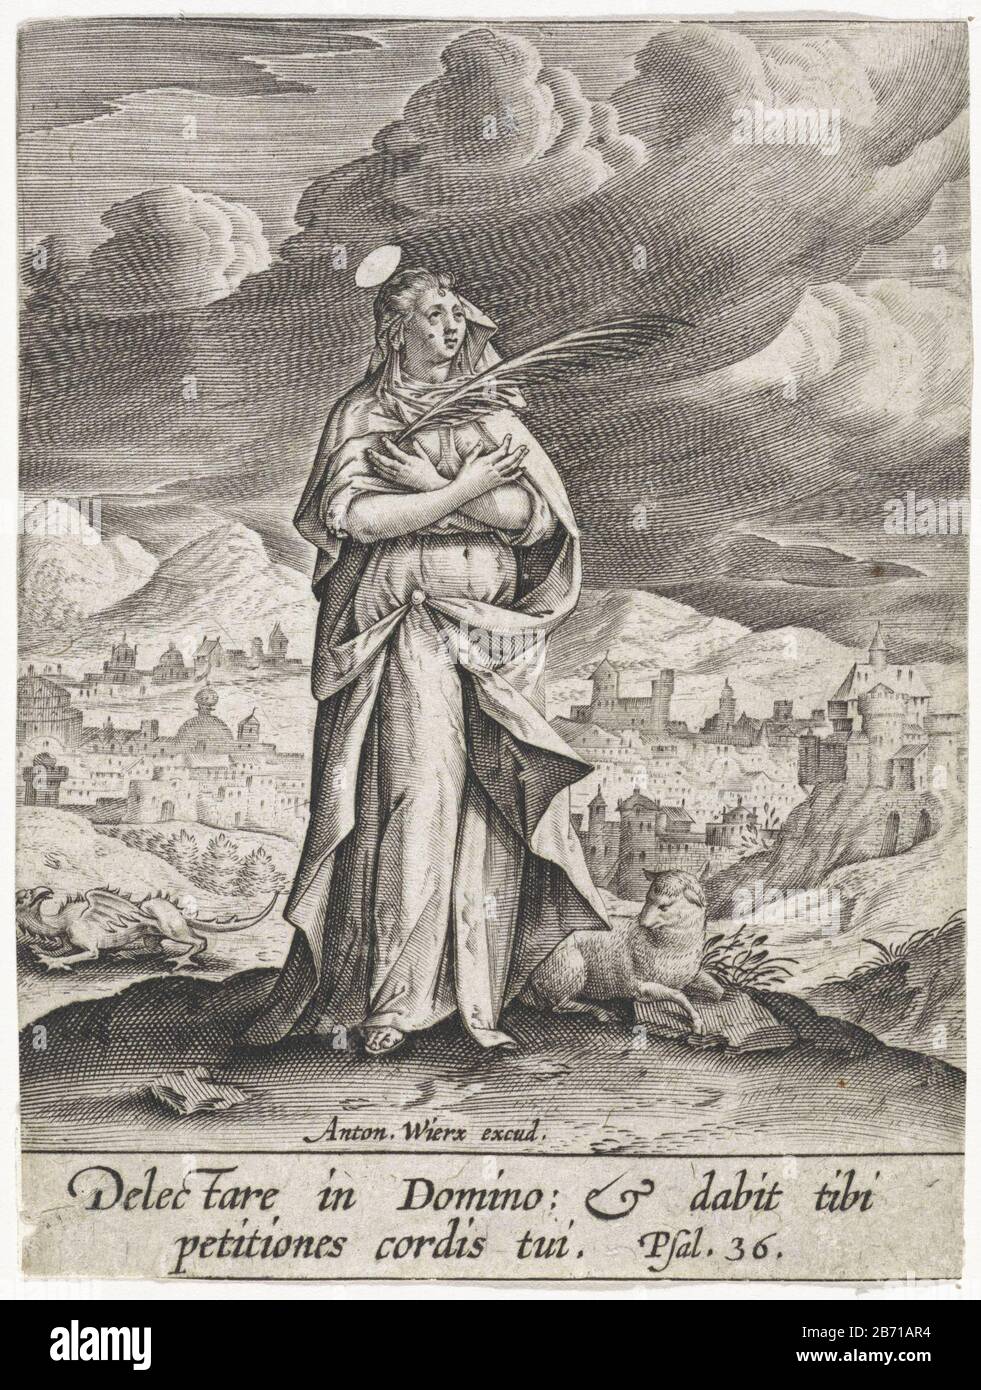 The saint Margaret of Antioch stands on a hill, crossed her arms over her chest. At her feet is a lamb. Rear left the dragon. In the background a view of a city. In a two-line Bible Quote margin from Ps. 36 in Latijn. Manufacturer : publisher: Antonie Who: rix (II) (listed building) printmaker: anonymous place manufacture: Antwerp Date: 1565 - Characteristics 1604 Physical: car material: paper Technique: engra (printing process) Dimensions: sheet: H 104 mm b × 79 mm Subject: the virgin martyr Margaret of Antioch; possible attributes: cross, crown, dragon (under feet or on chain), (or chaplet) Stock Photo